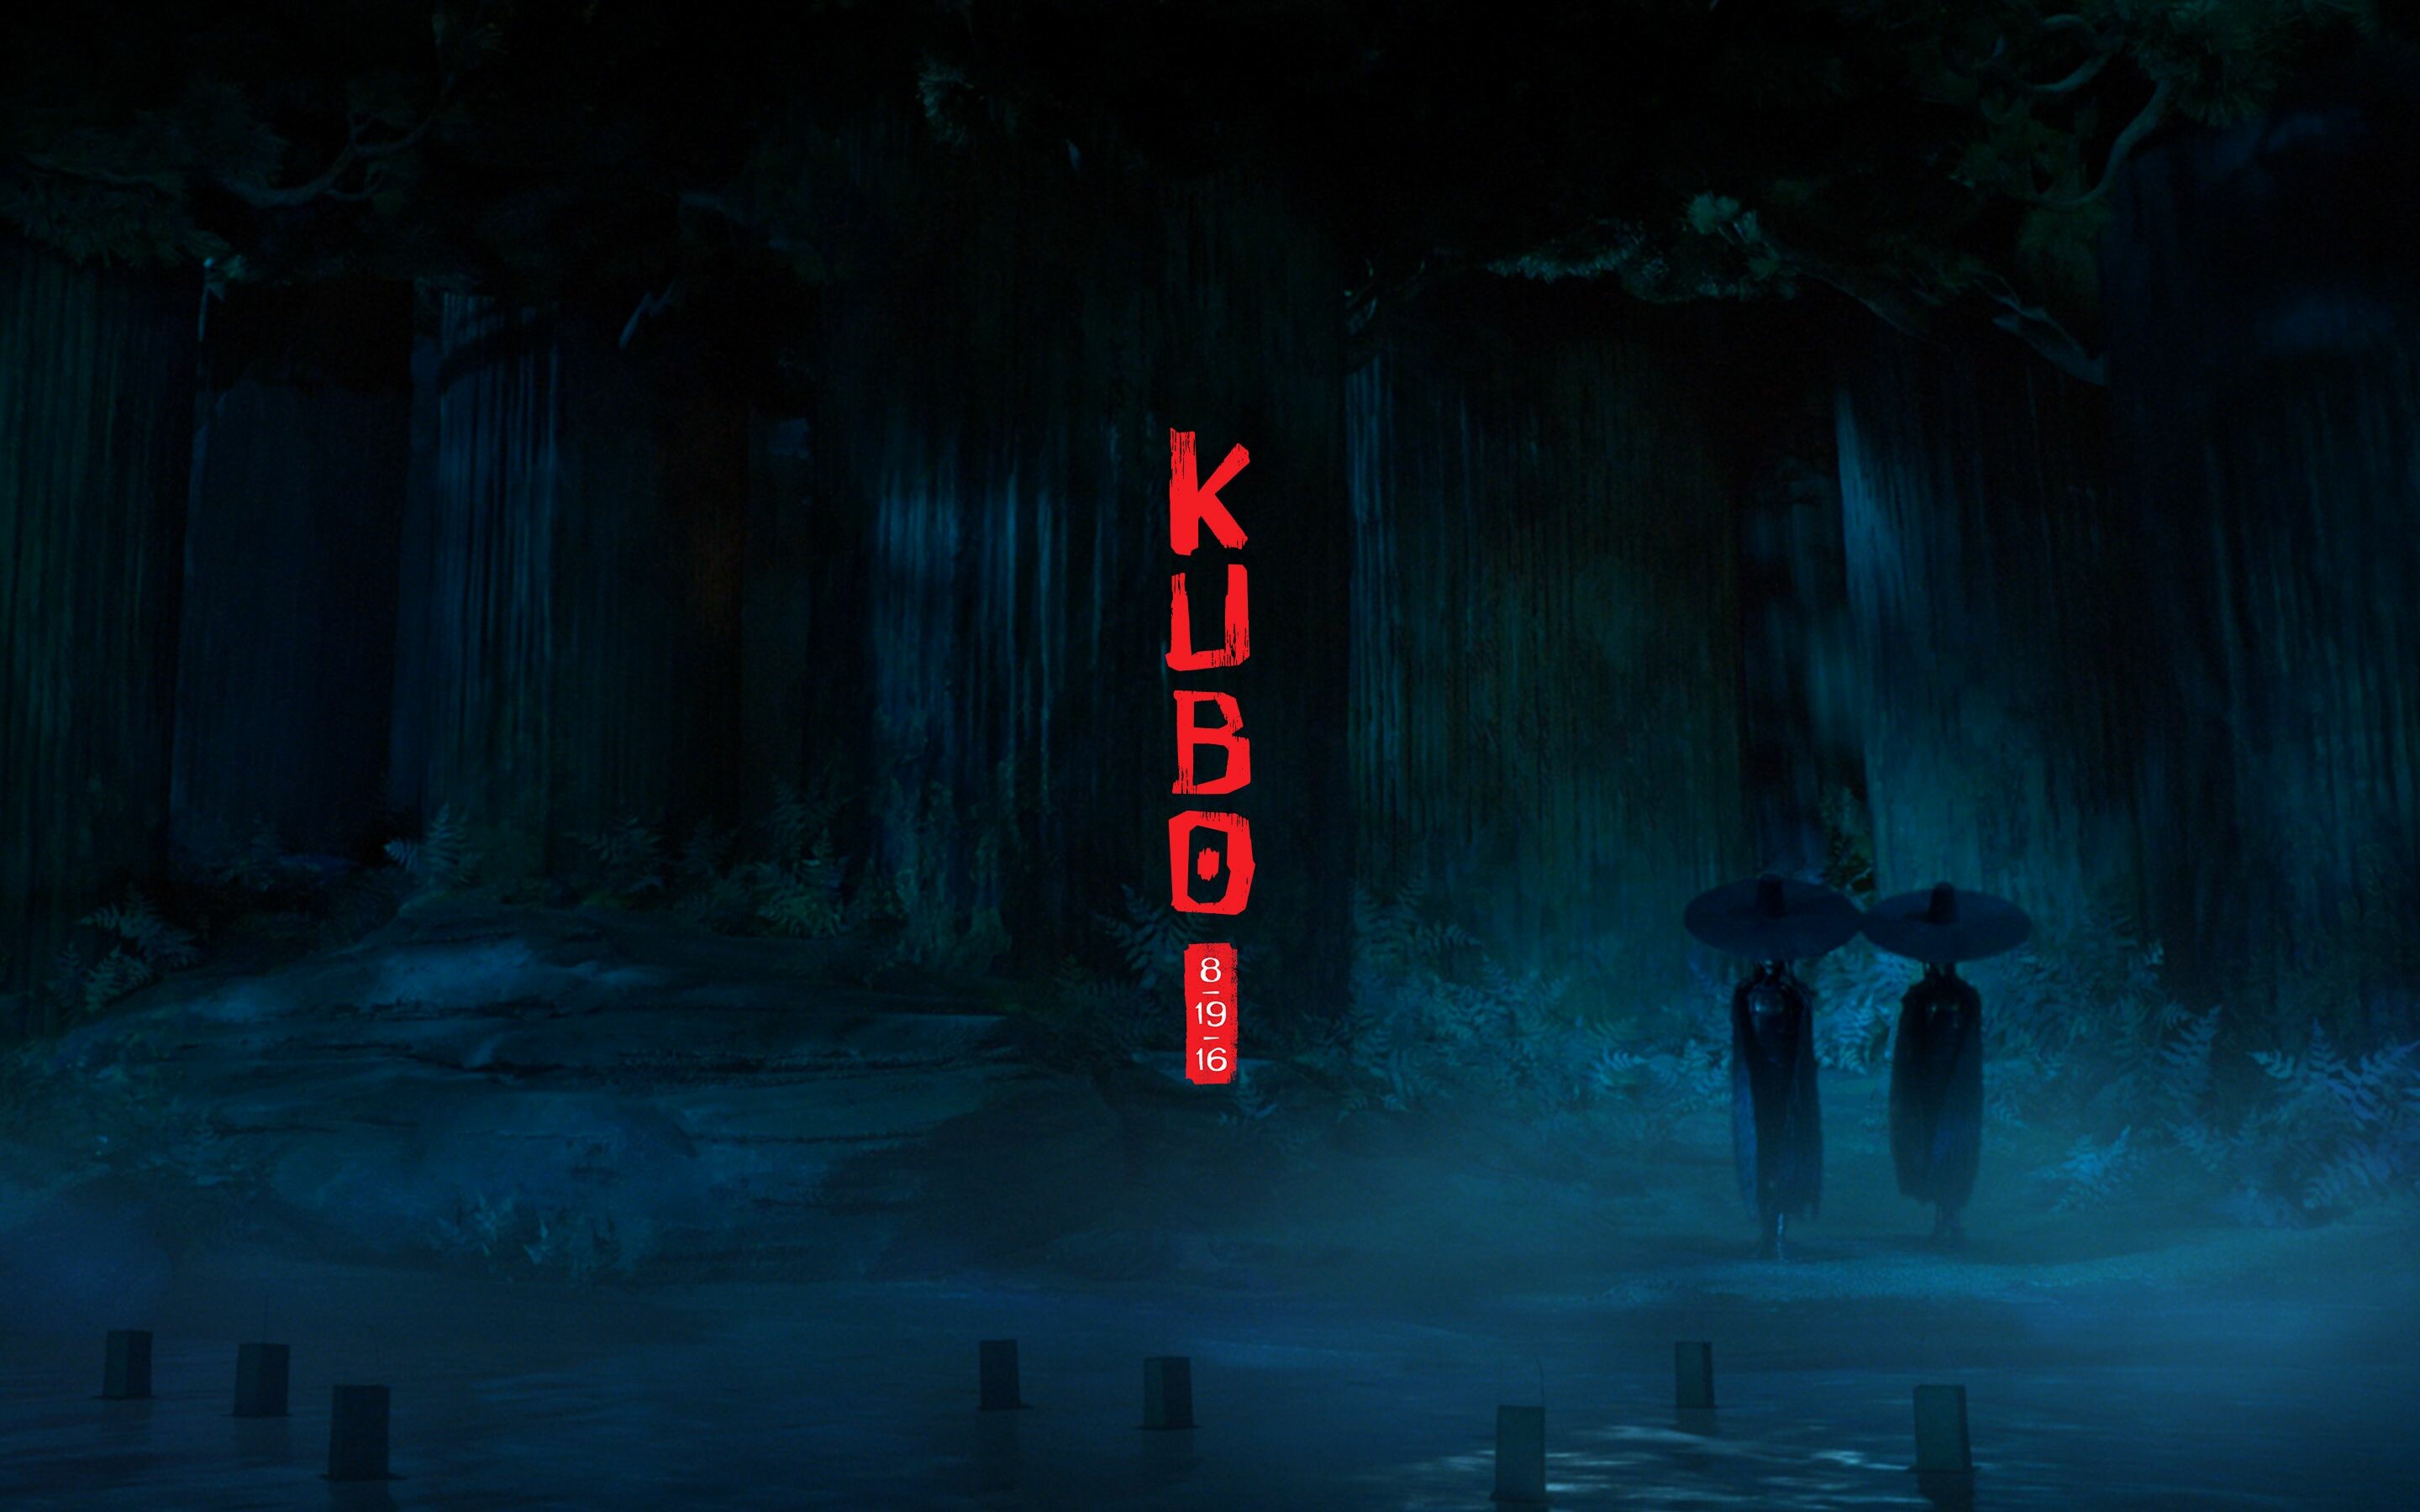 HD wallpaper, Desktop Hd Kubo And The Two Strings Wallpaper Photo, Breathtaking Trailer, Japanese Folklore, 2880X1800 Hd Desktop, Animated Masterpiece, Kubo And The Two Strings